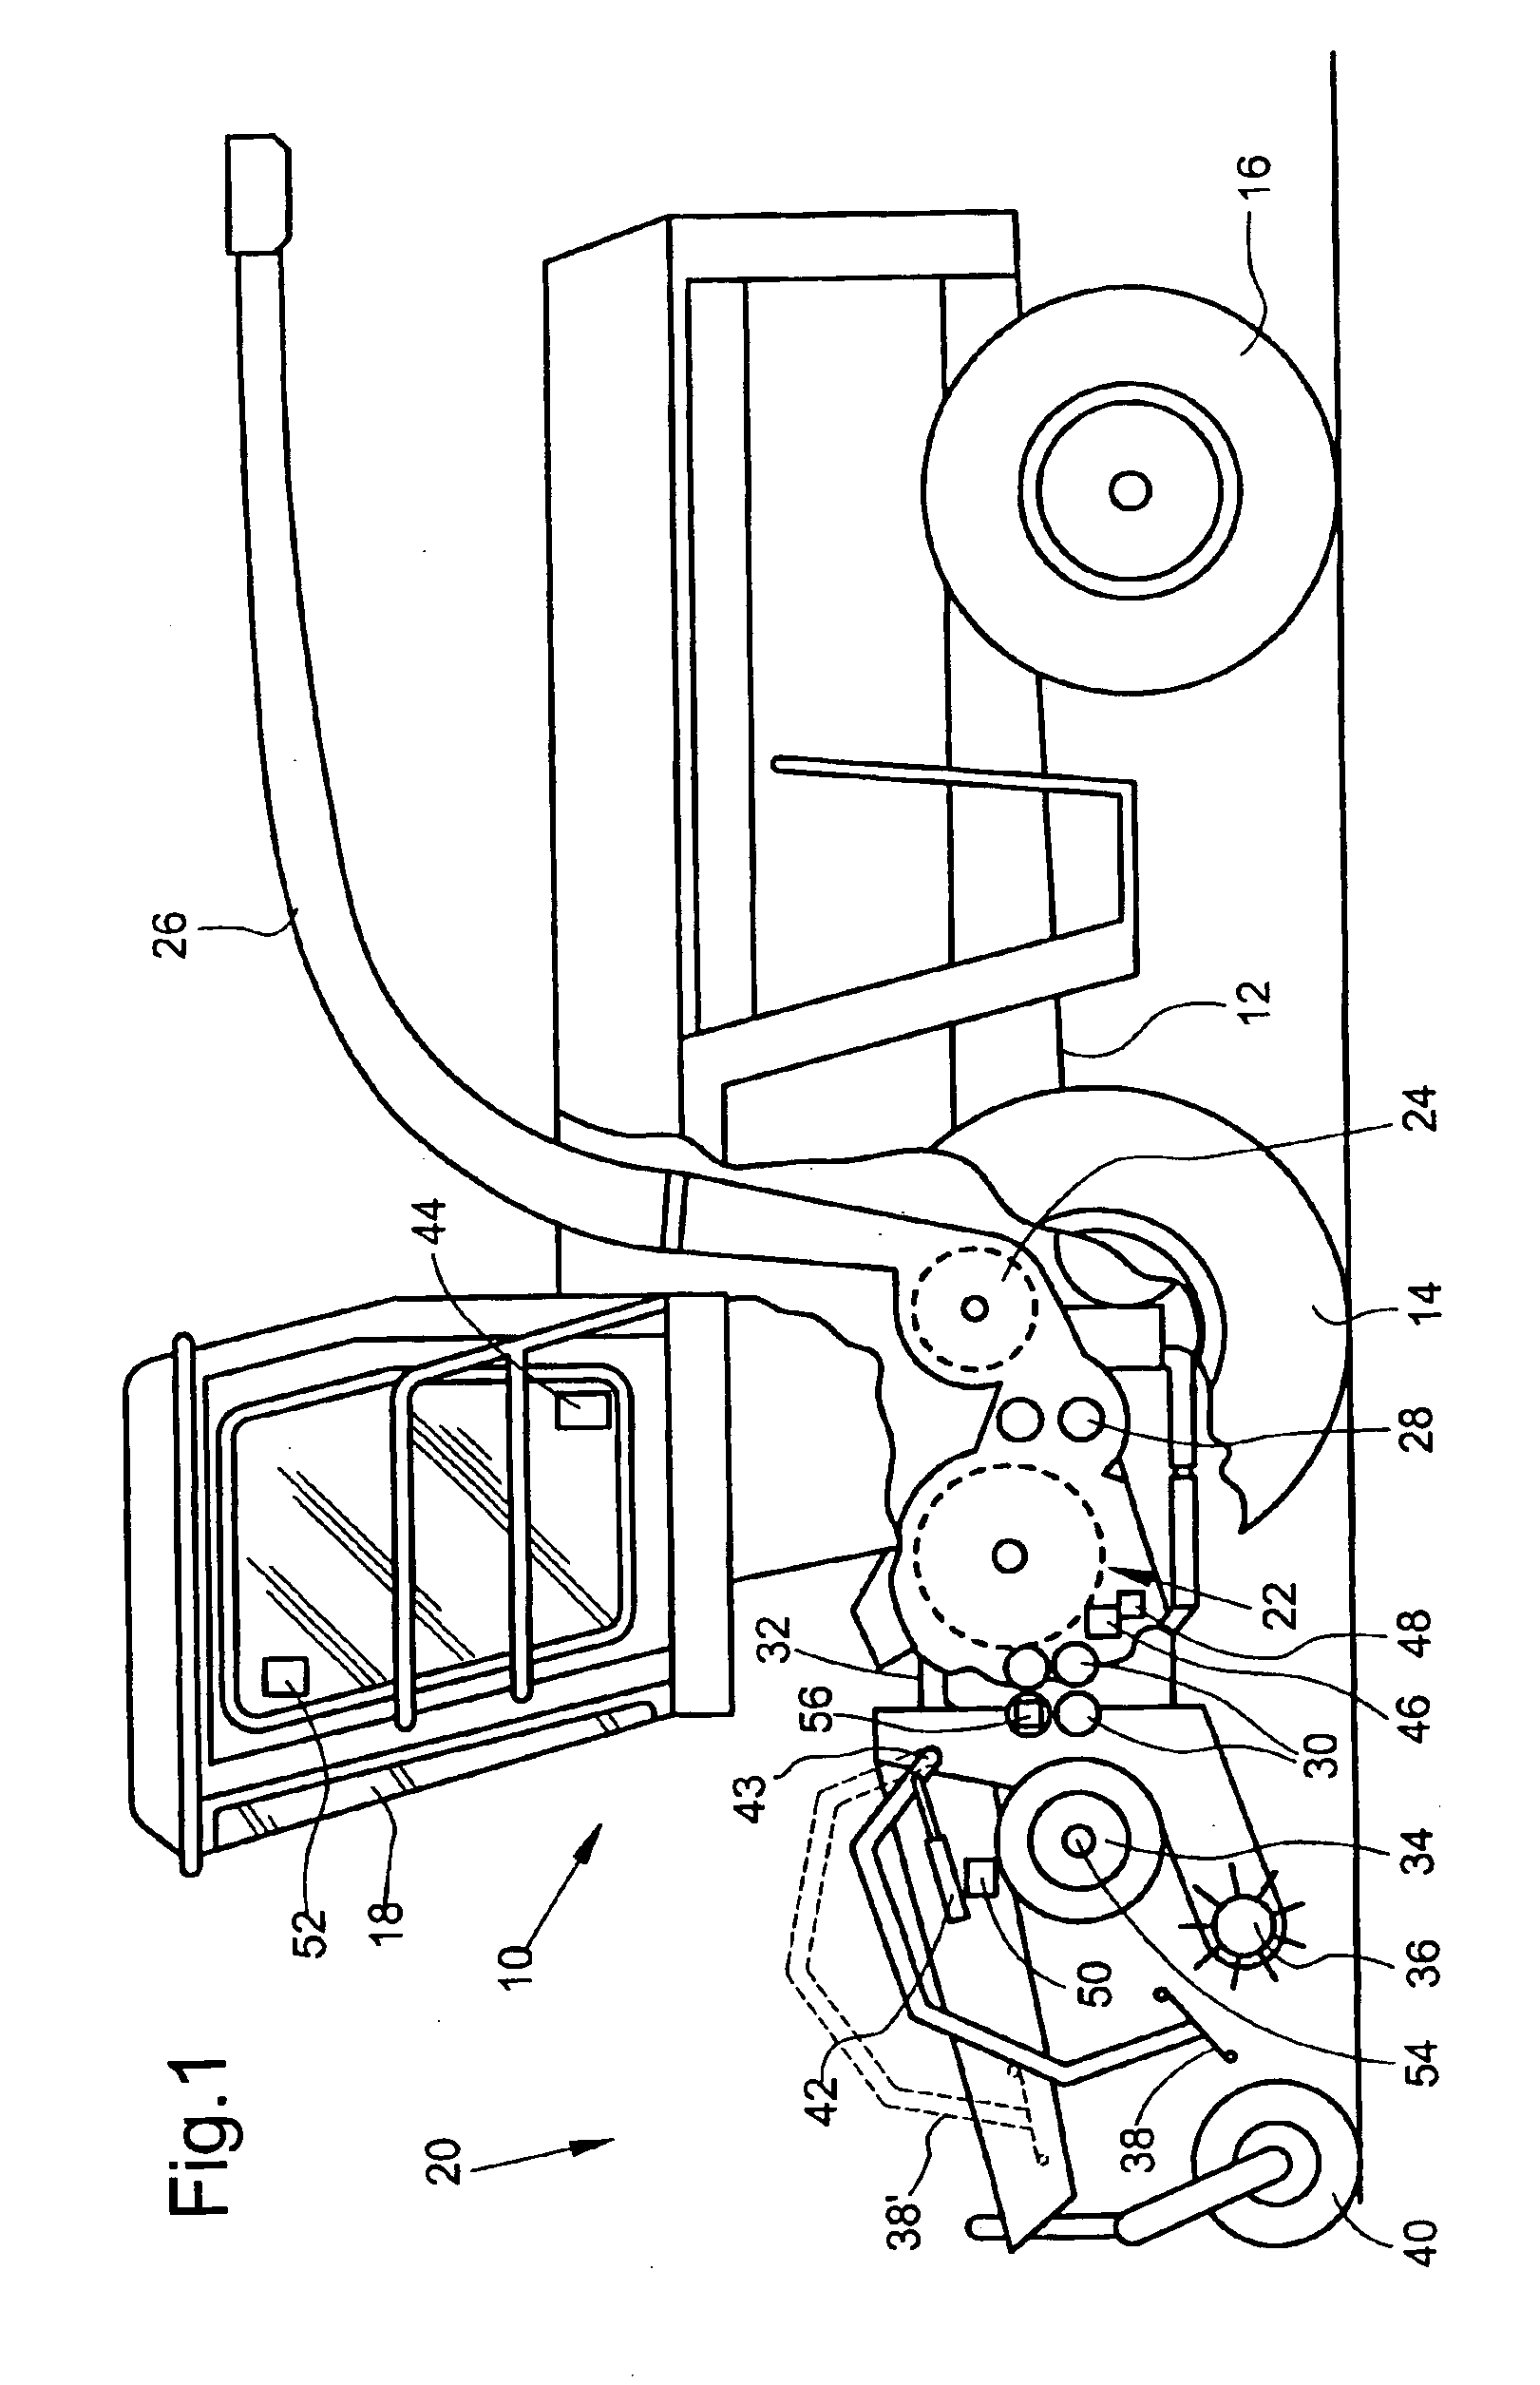 Detection arrangement for the detection of a crop jam in a harvesting machine